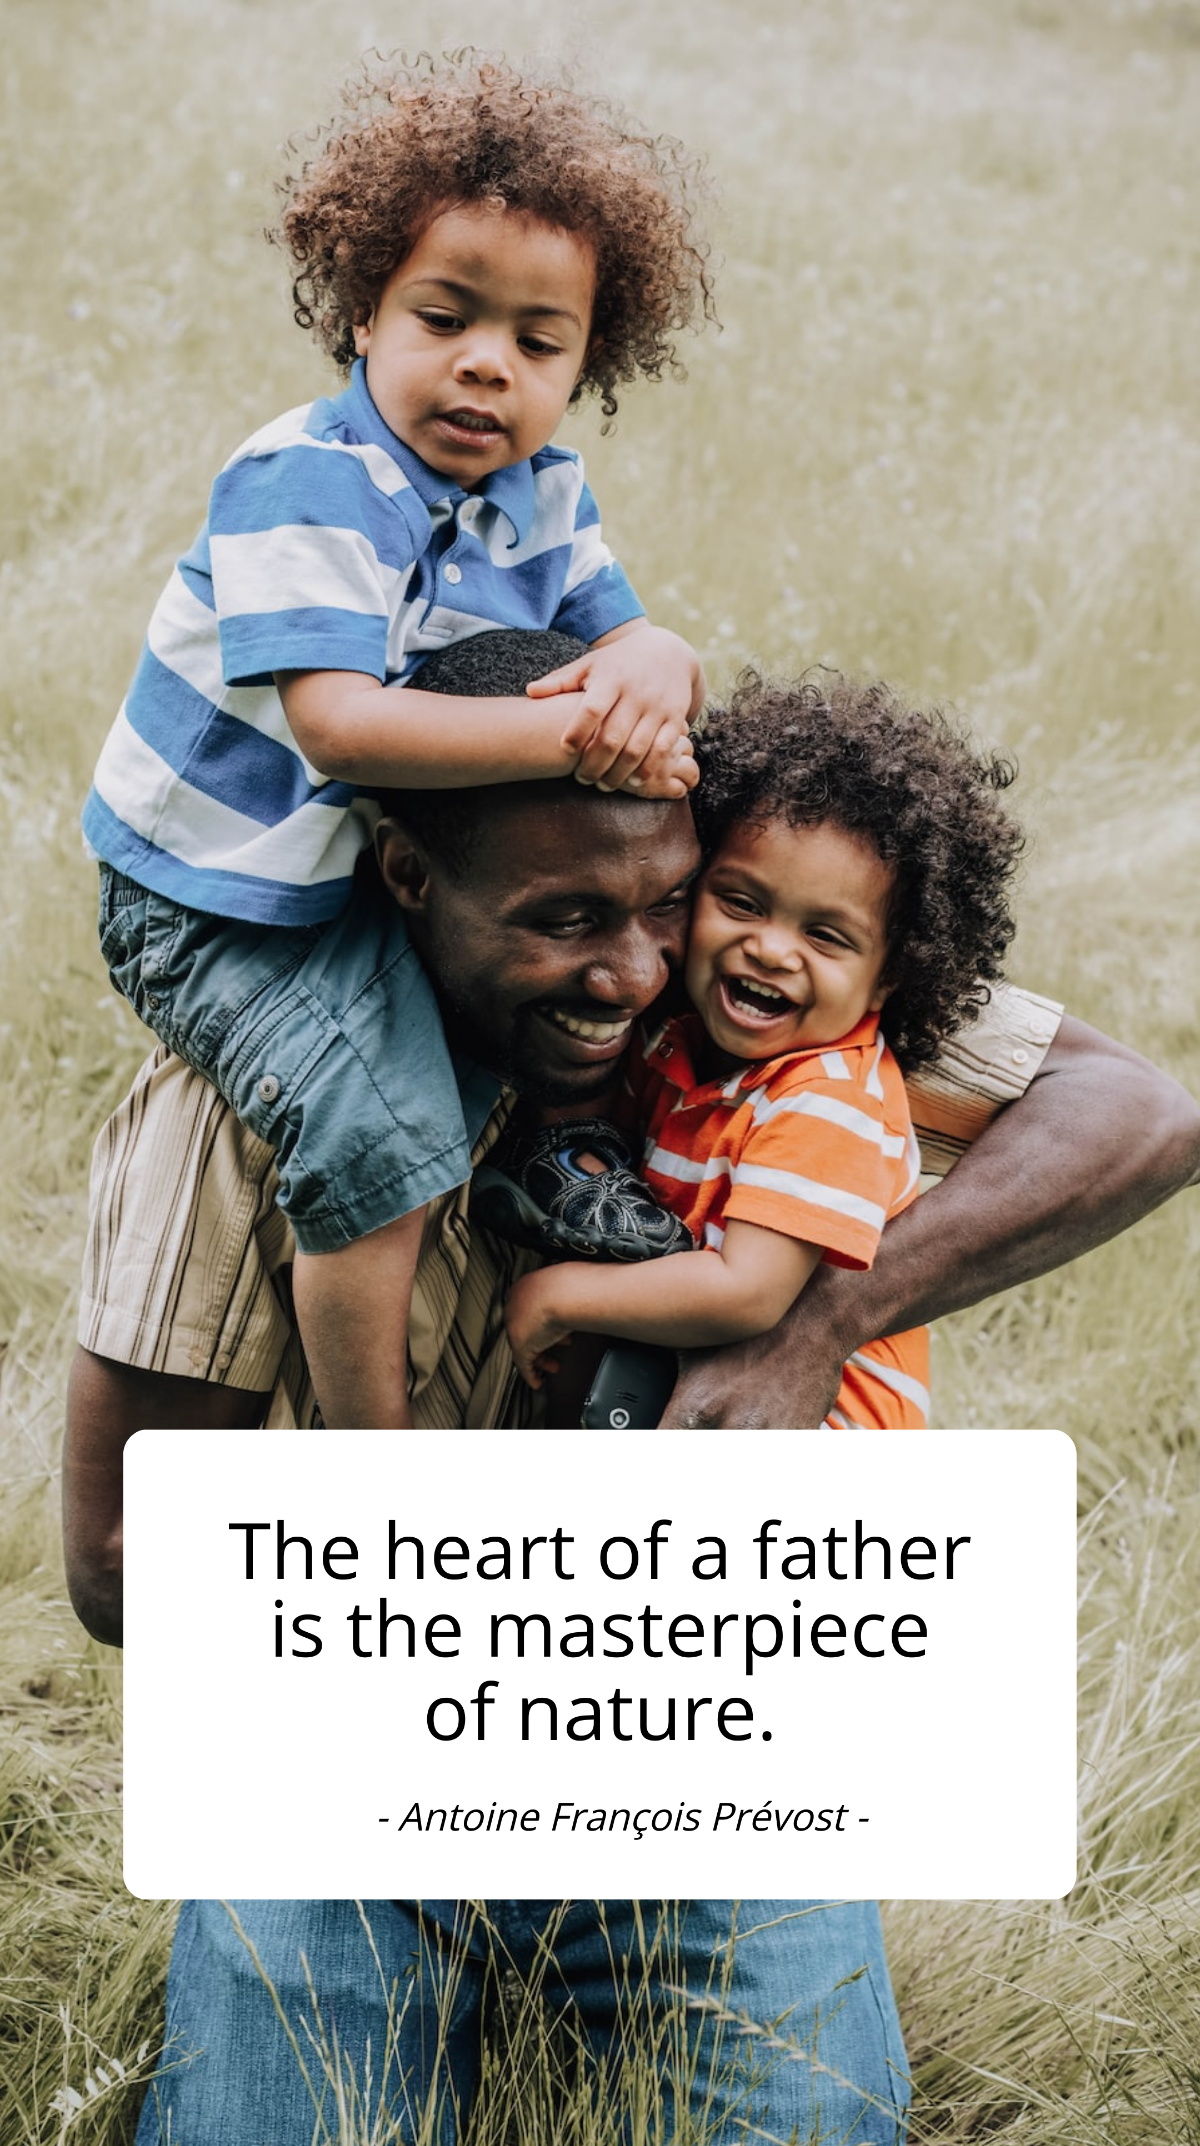 Antoine François Prévost - The heart of a father is the masterpiece of nature. Template